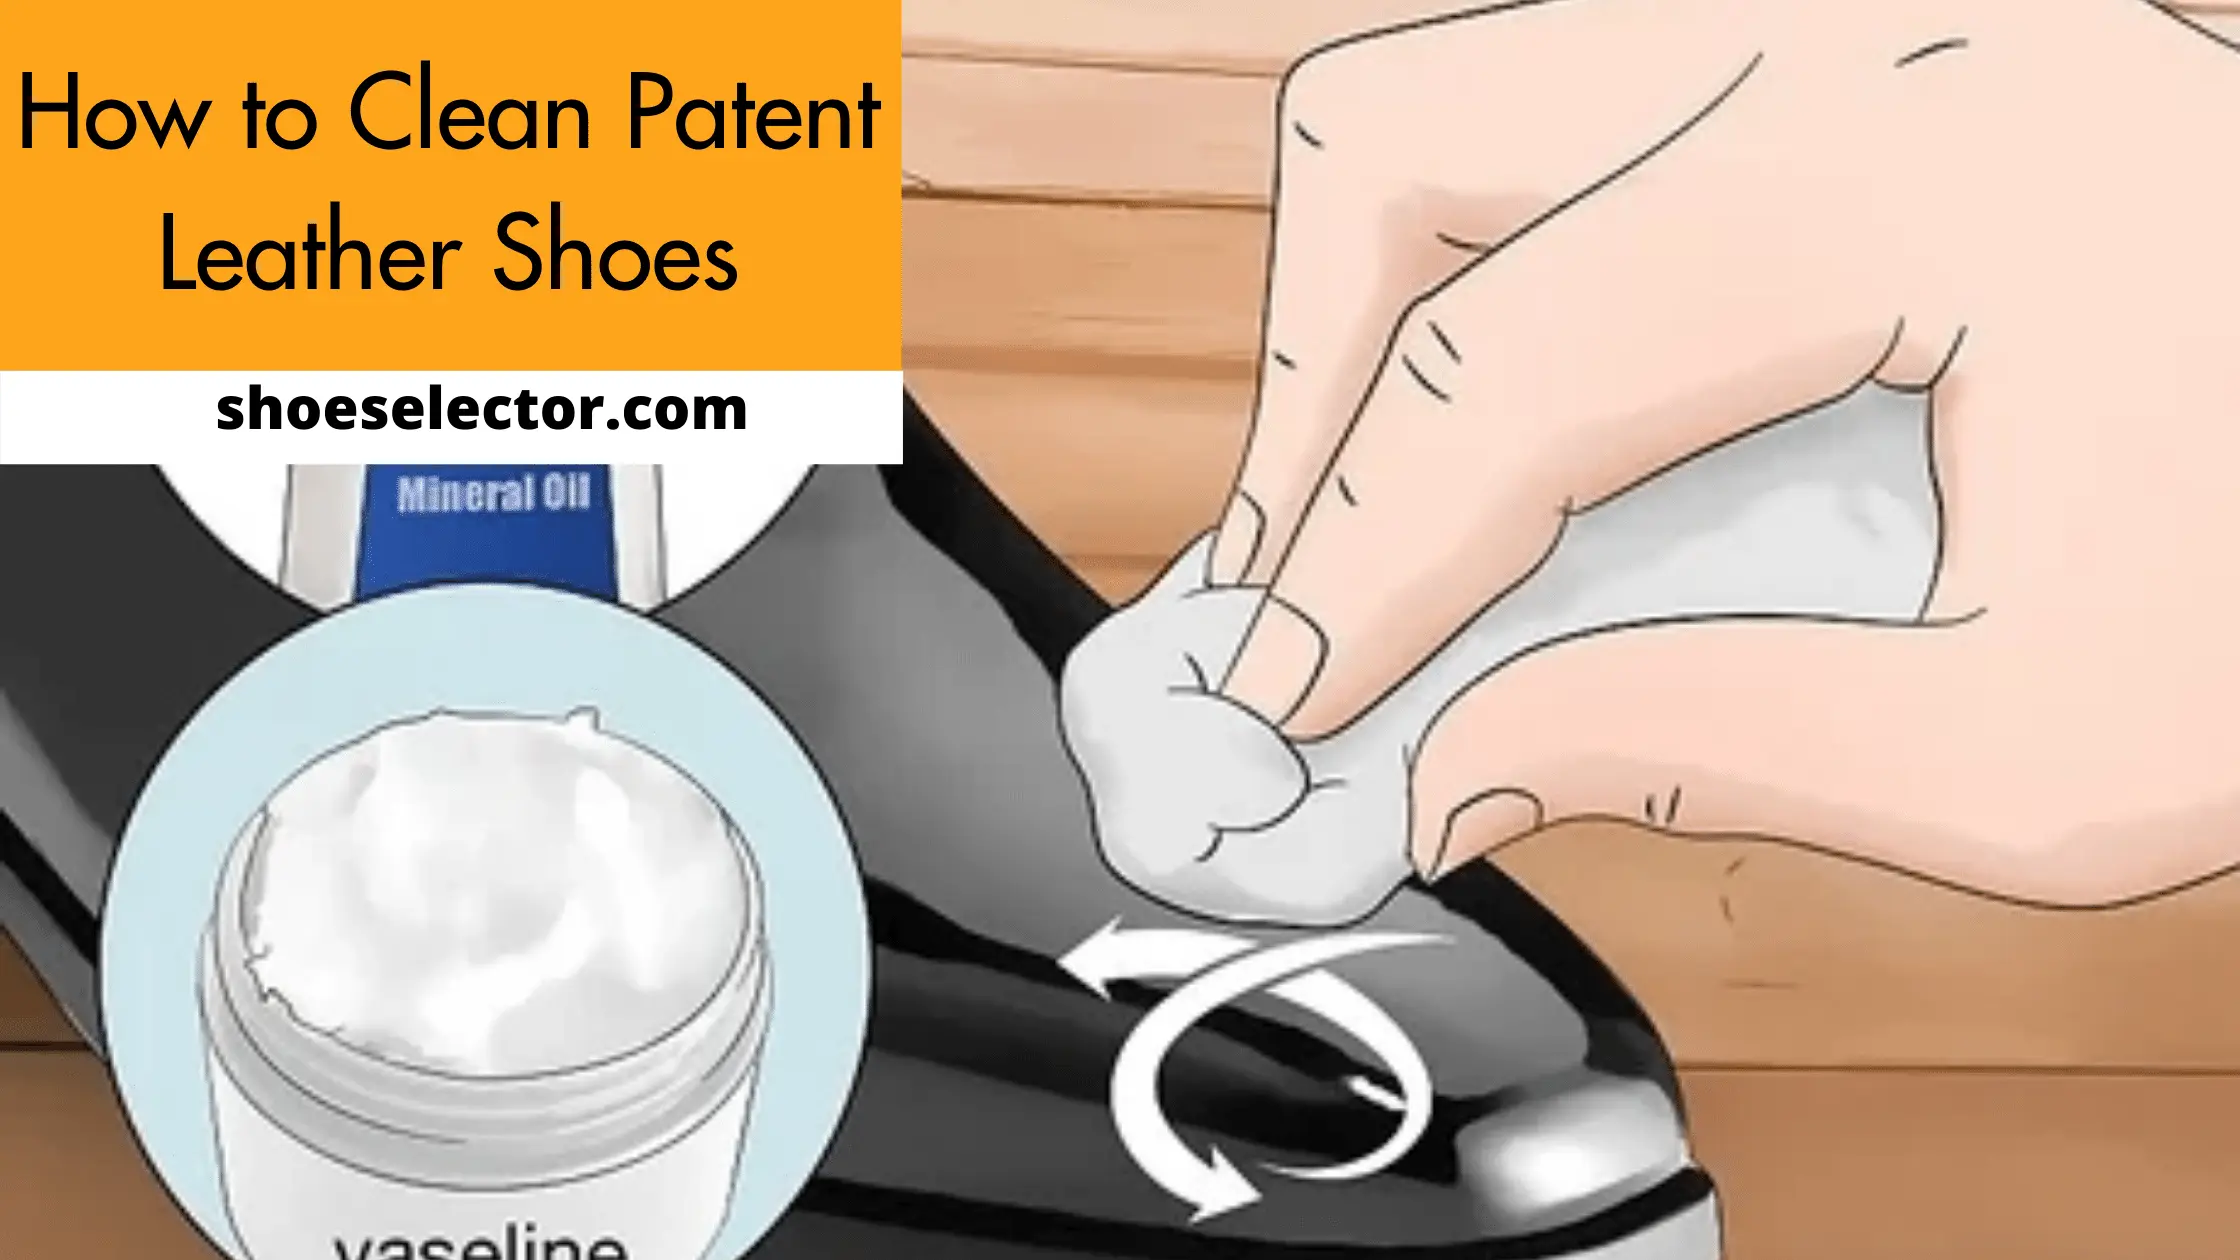 How to Clean Patent Leather Shoes In No Time - Step By Step Guide